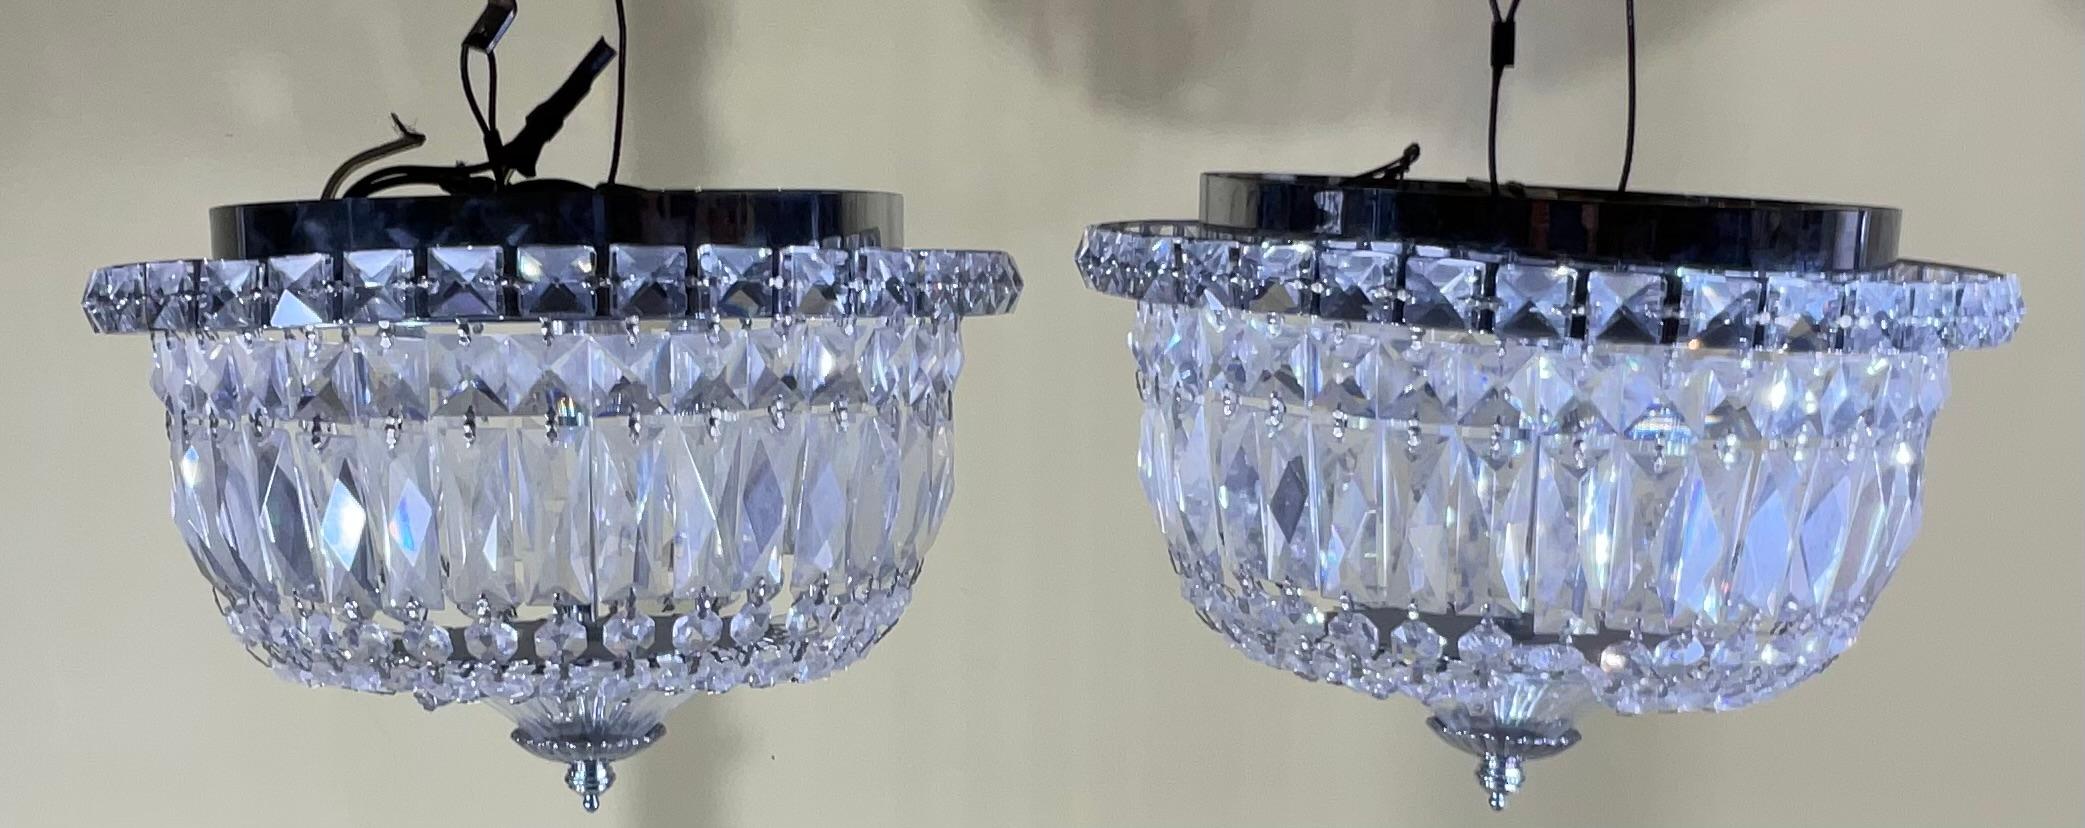 Hollywood Regency Pair Of 1940's Hollywood Style Crystal Drop-Down Flush Mount Chandelier For Sale